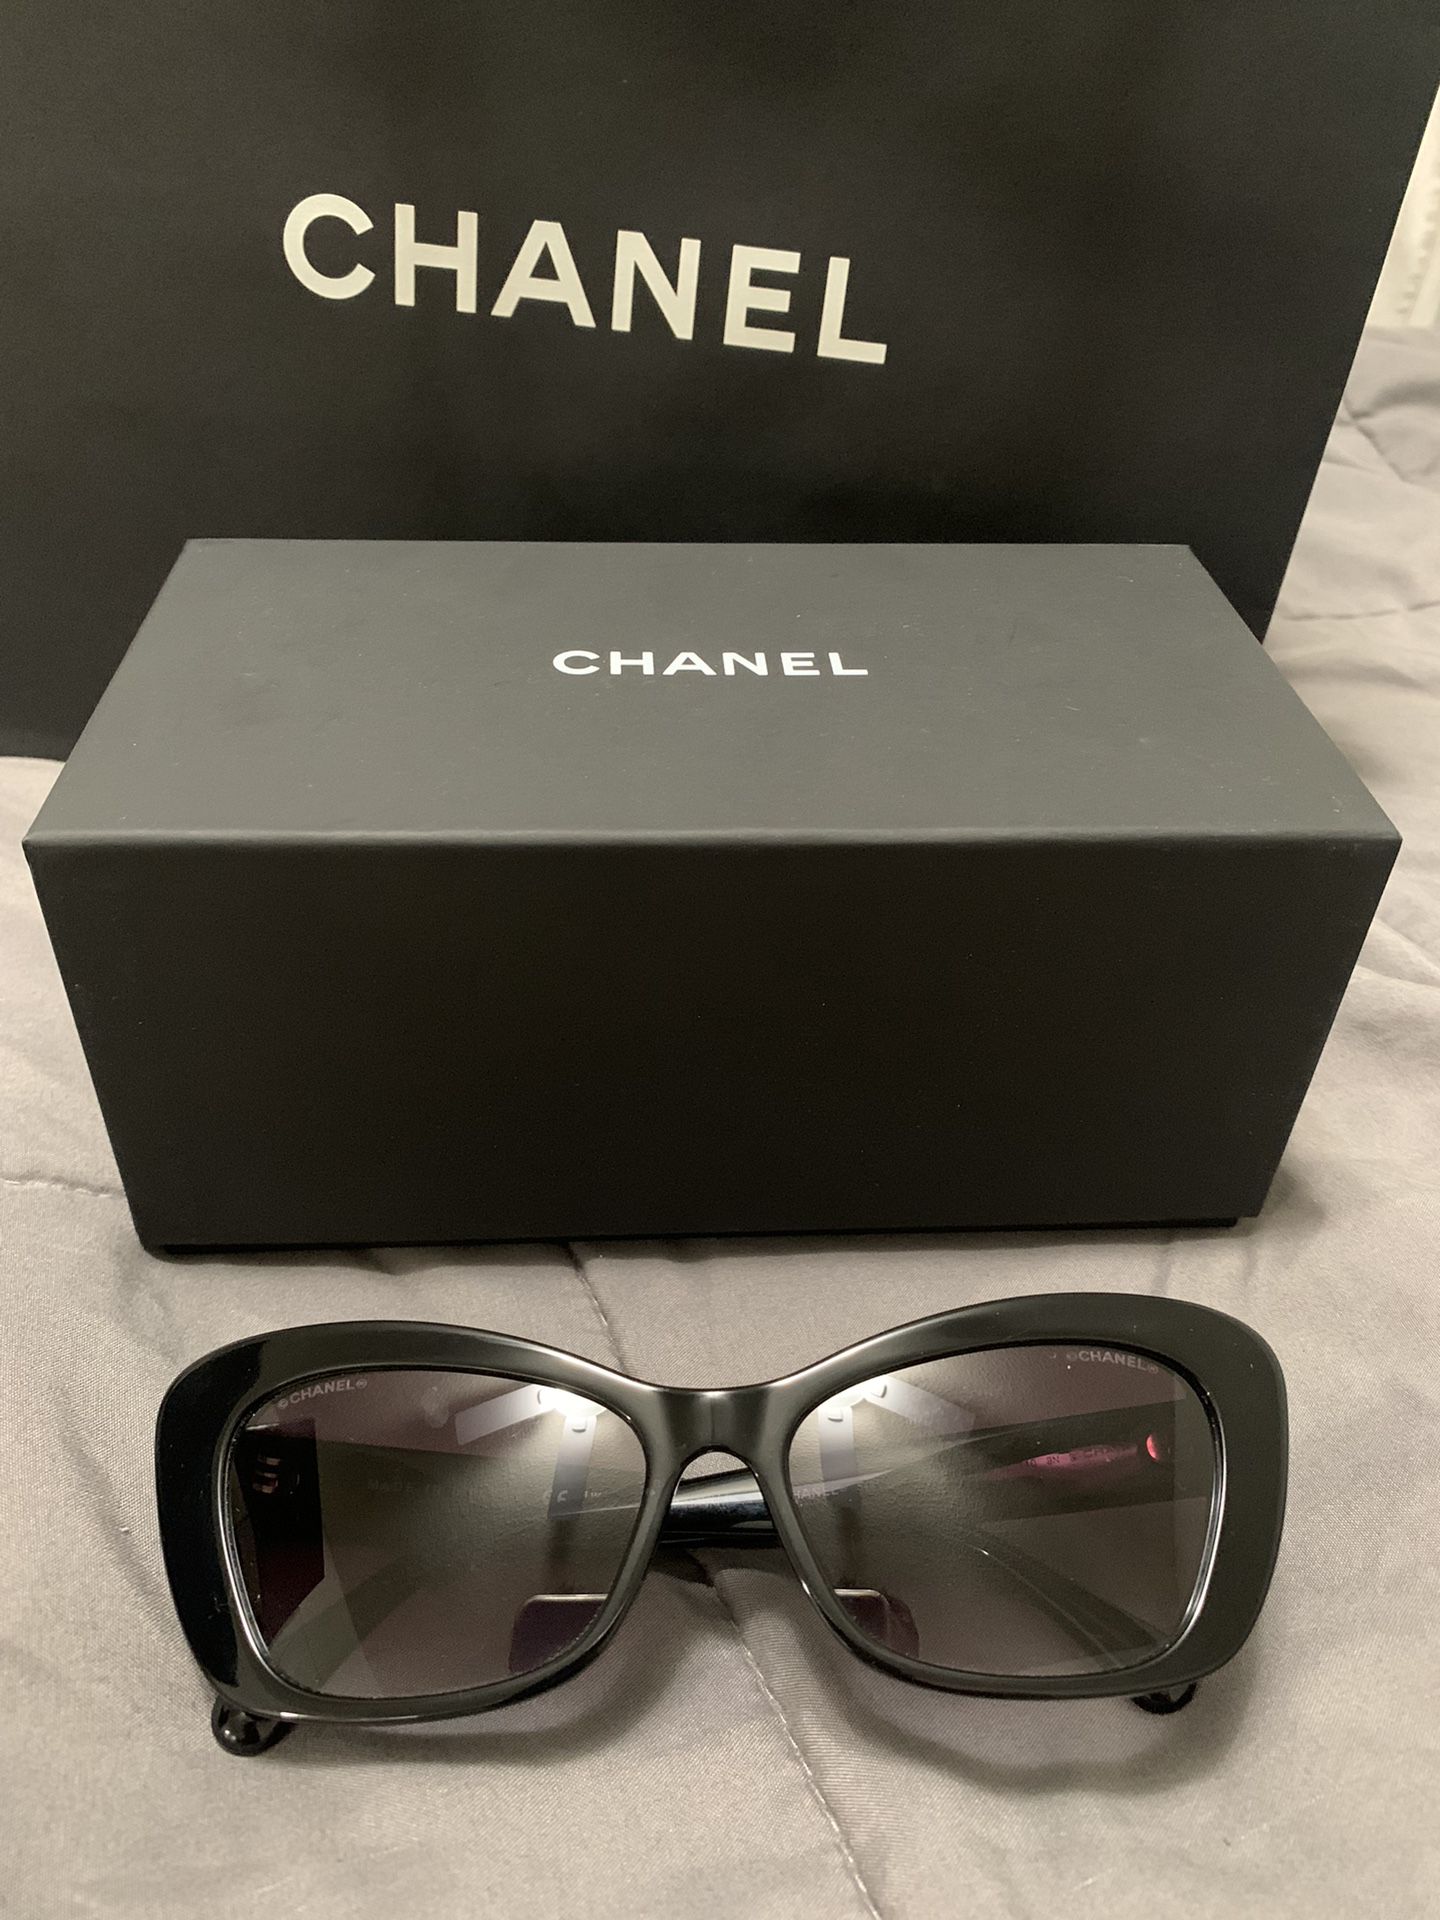 Vintage Chanel 5014 Sunglasses for Sale in Vancouver, WA - OfferUp